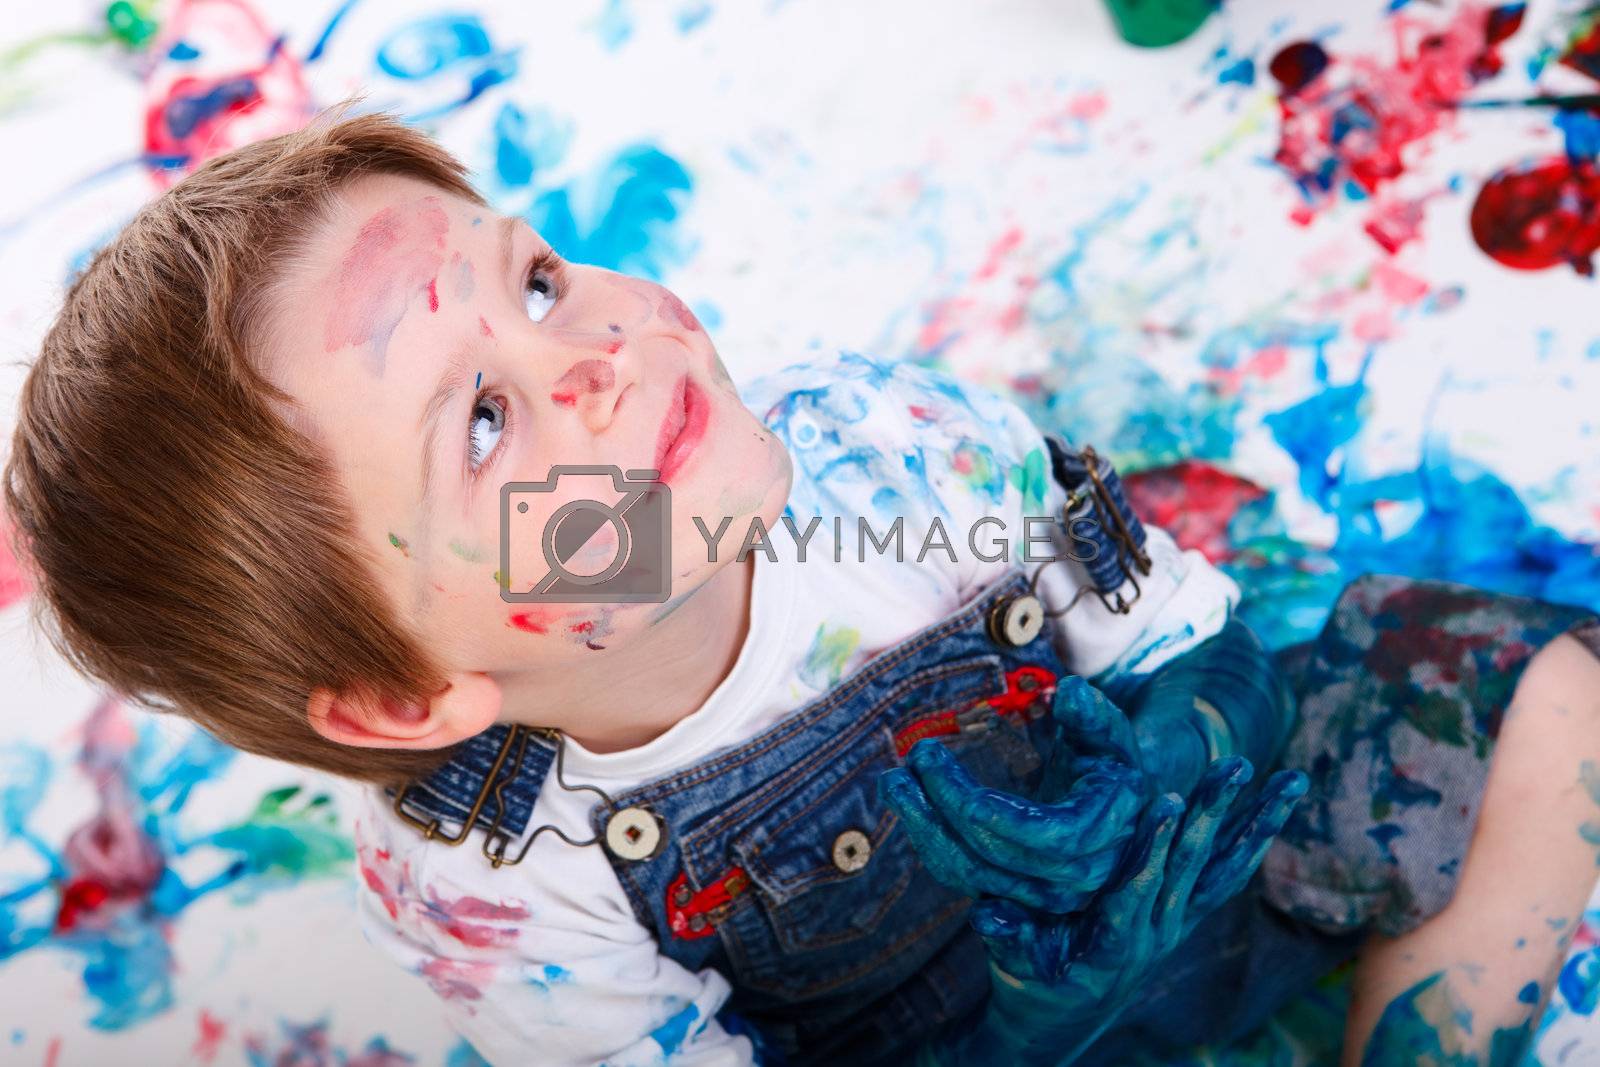 Royalty free image of Boy painting by shalamov